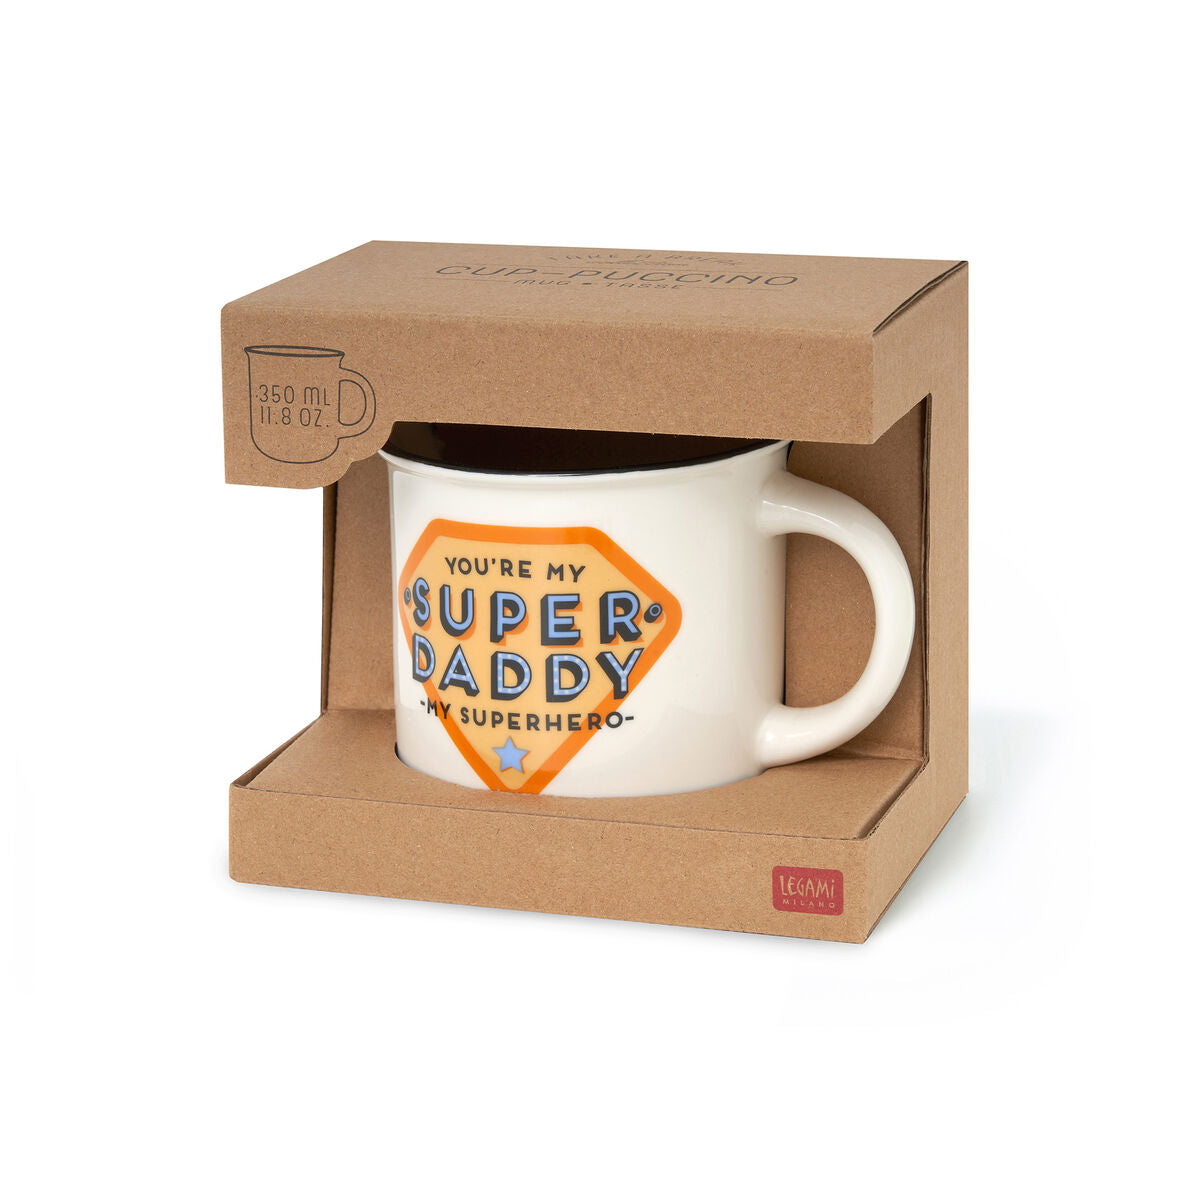 Fab Gifts | Legami Cup-Puccino - Super Daddy by Weirs of Baggot Street